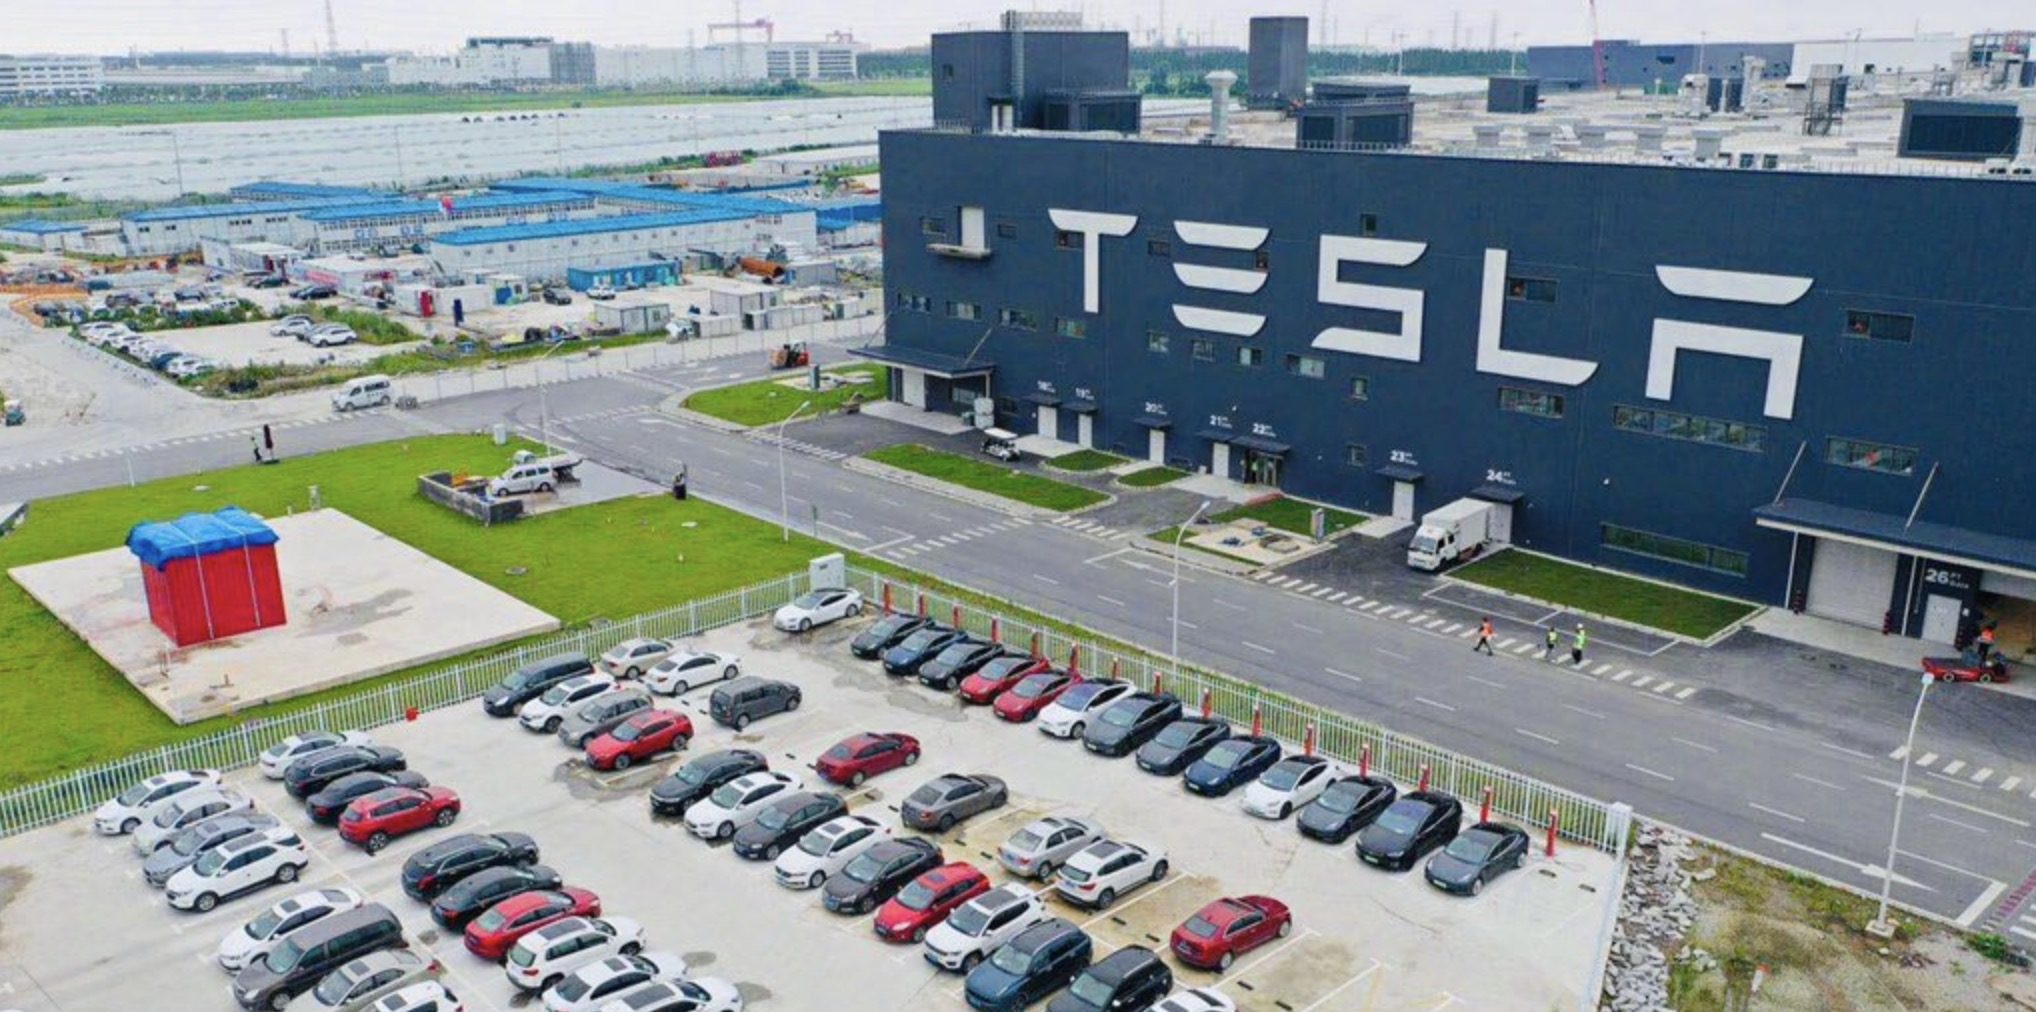 Tesla To Double Production In Germany, No Extra Water Needed: Report